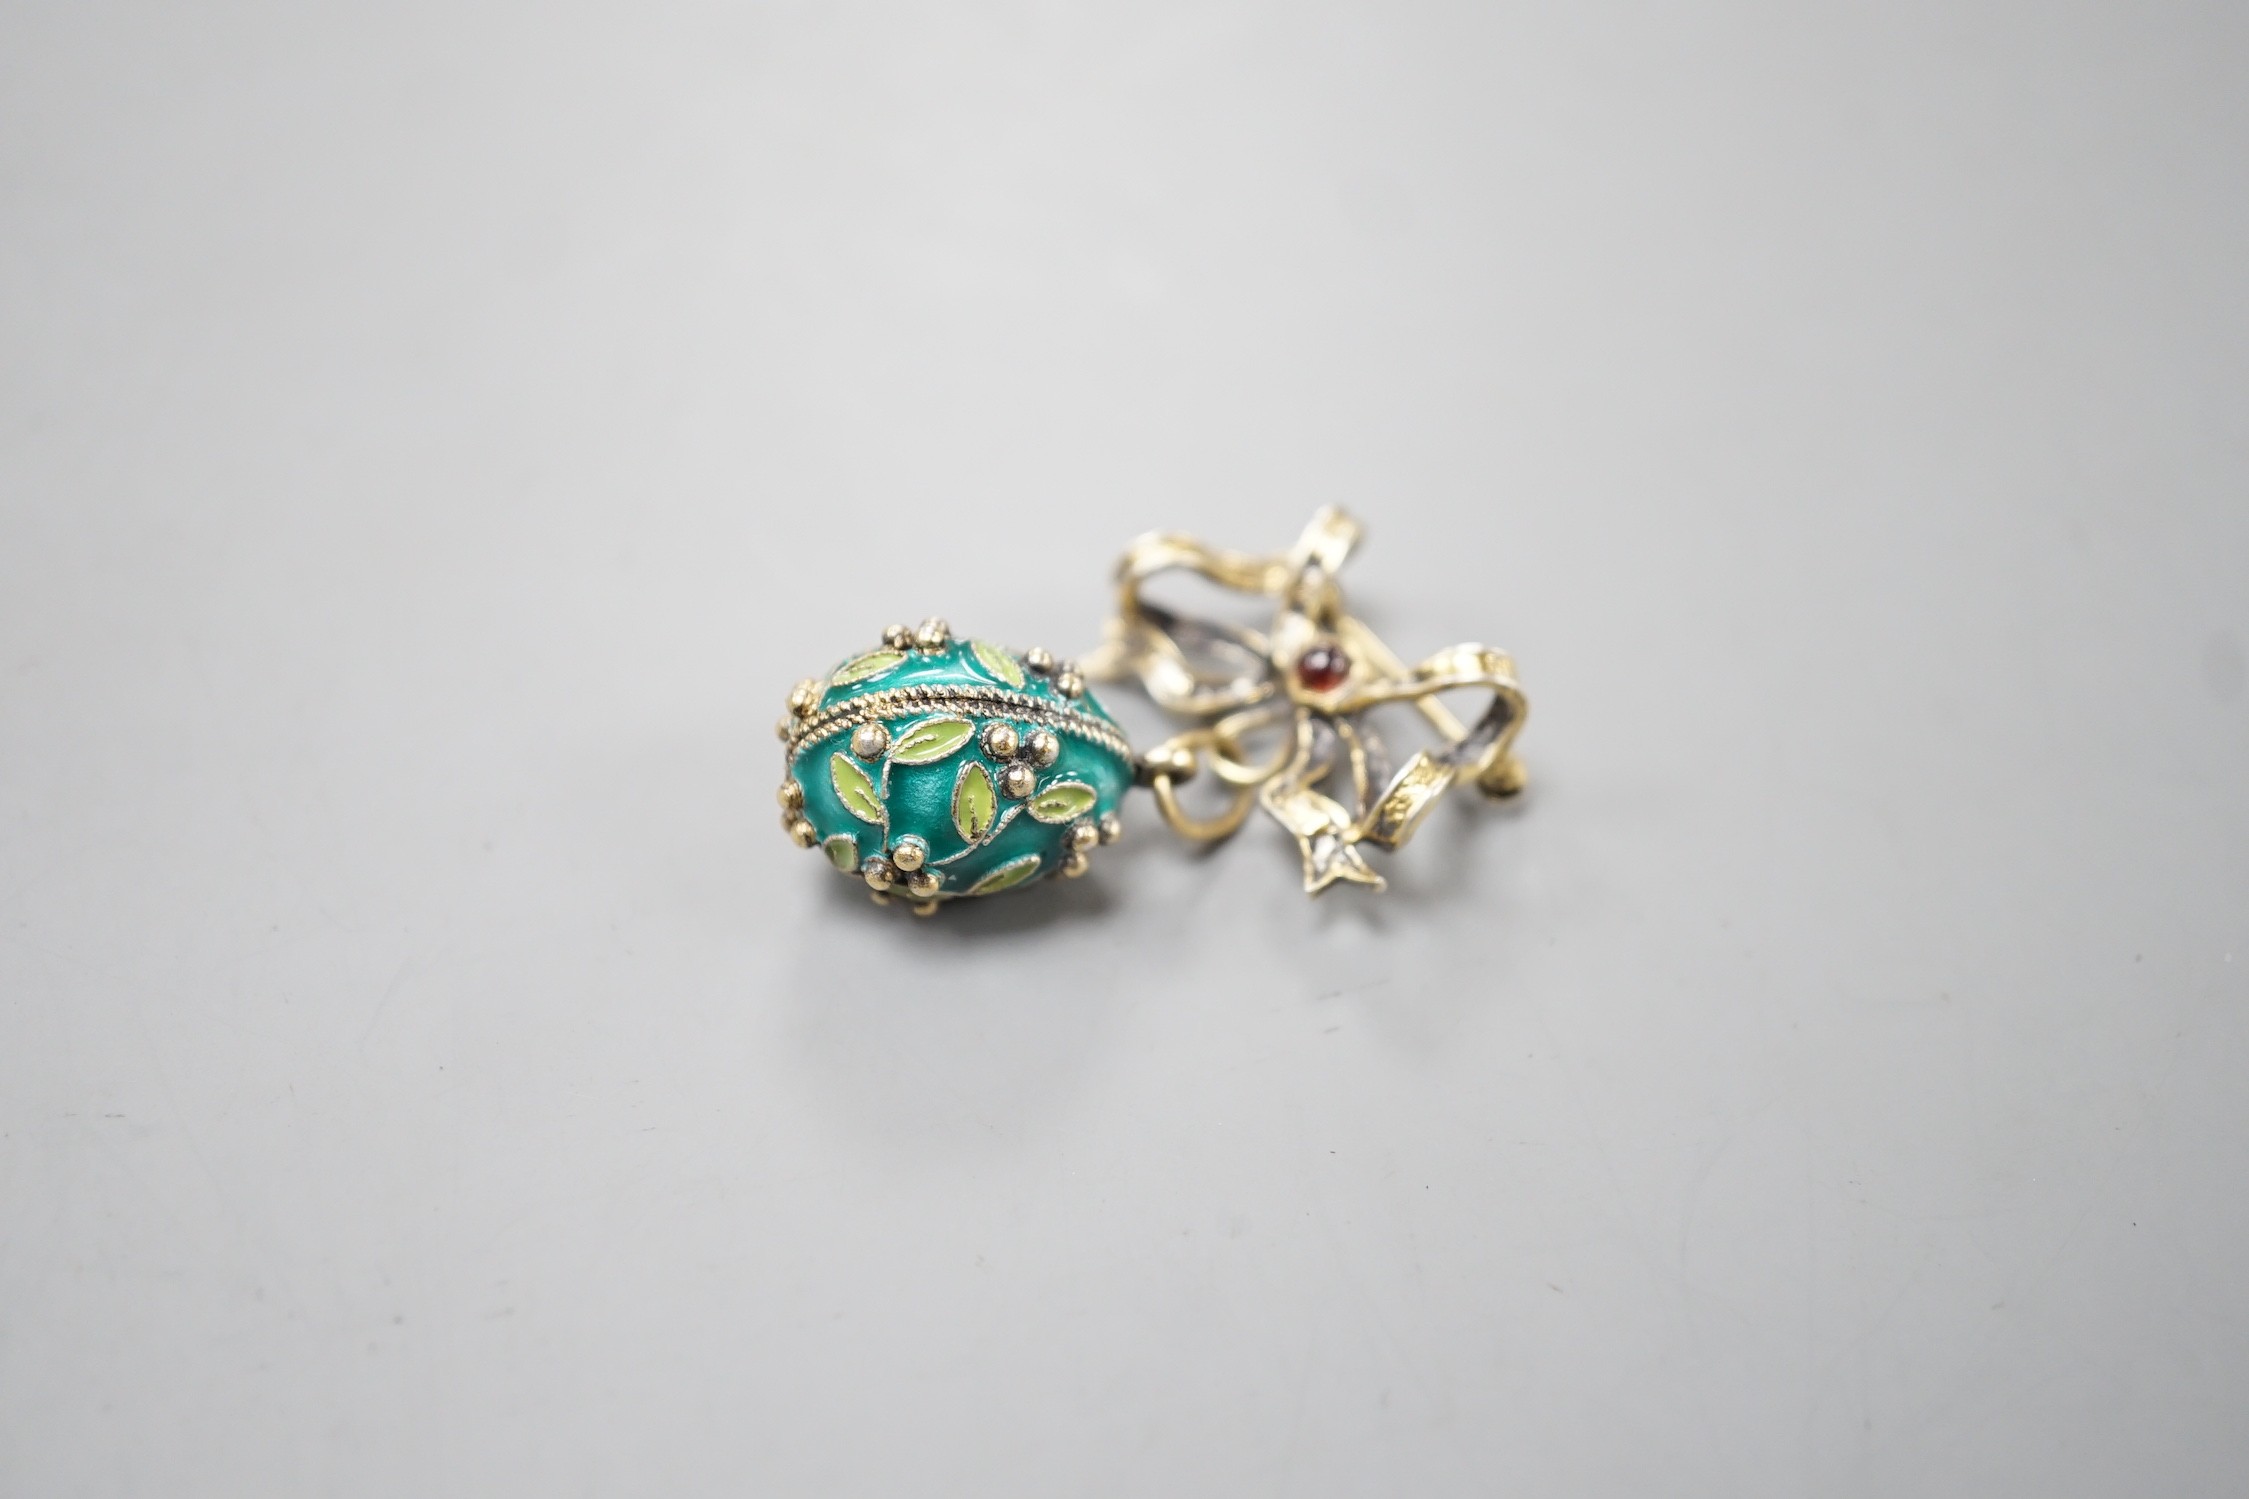 A mid 20th century Soviet gilt 925 and enamelled egg pendant, 21mm, on a gilt white metal ribbon bow suspension brooch.